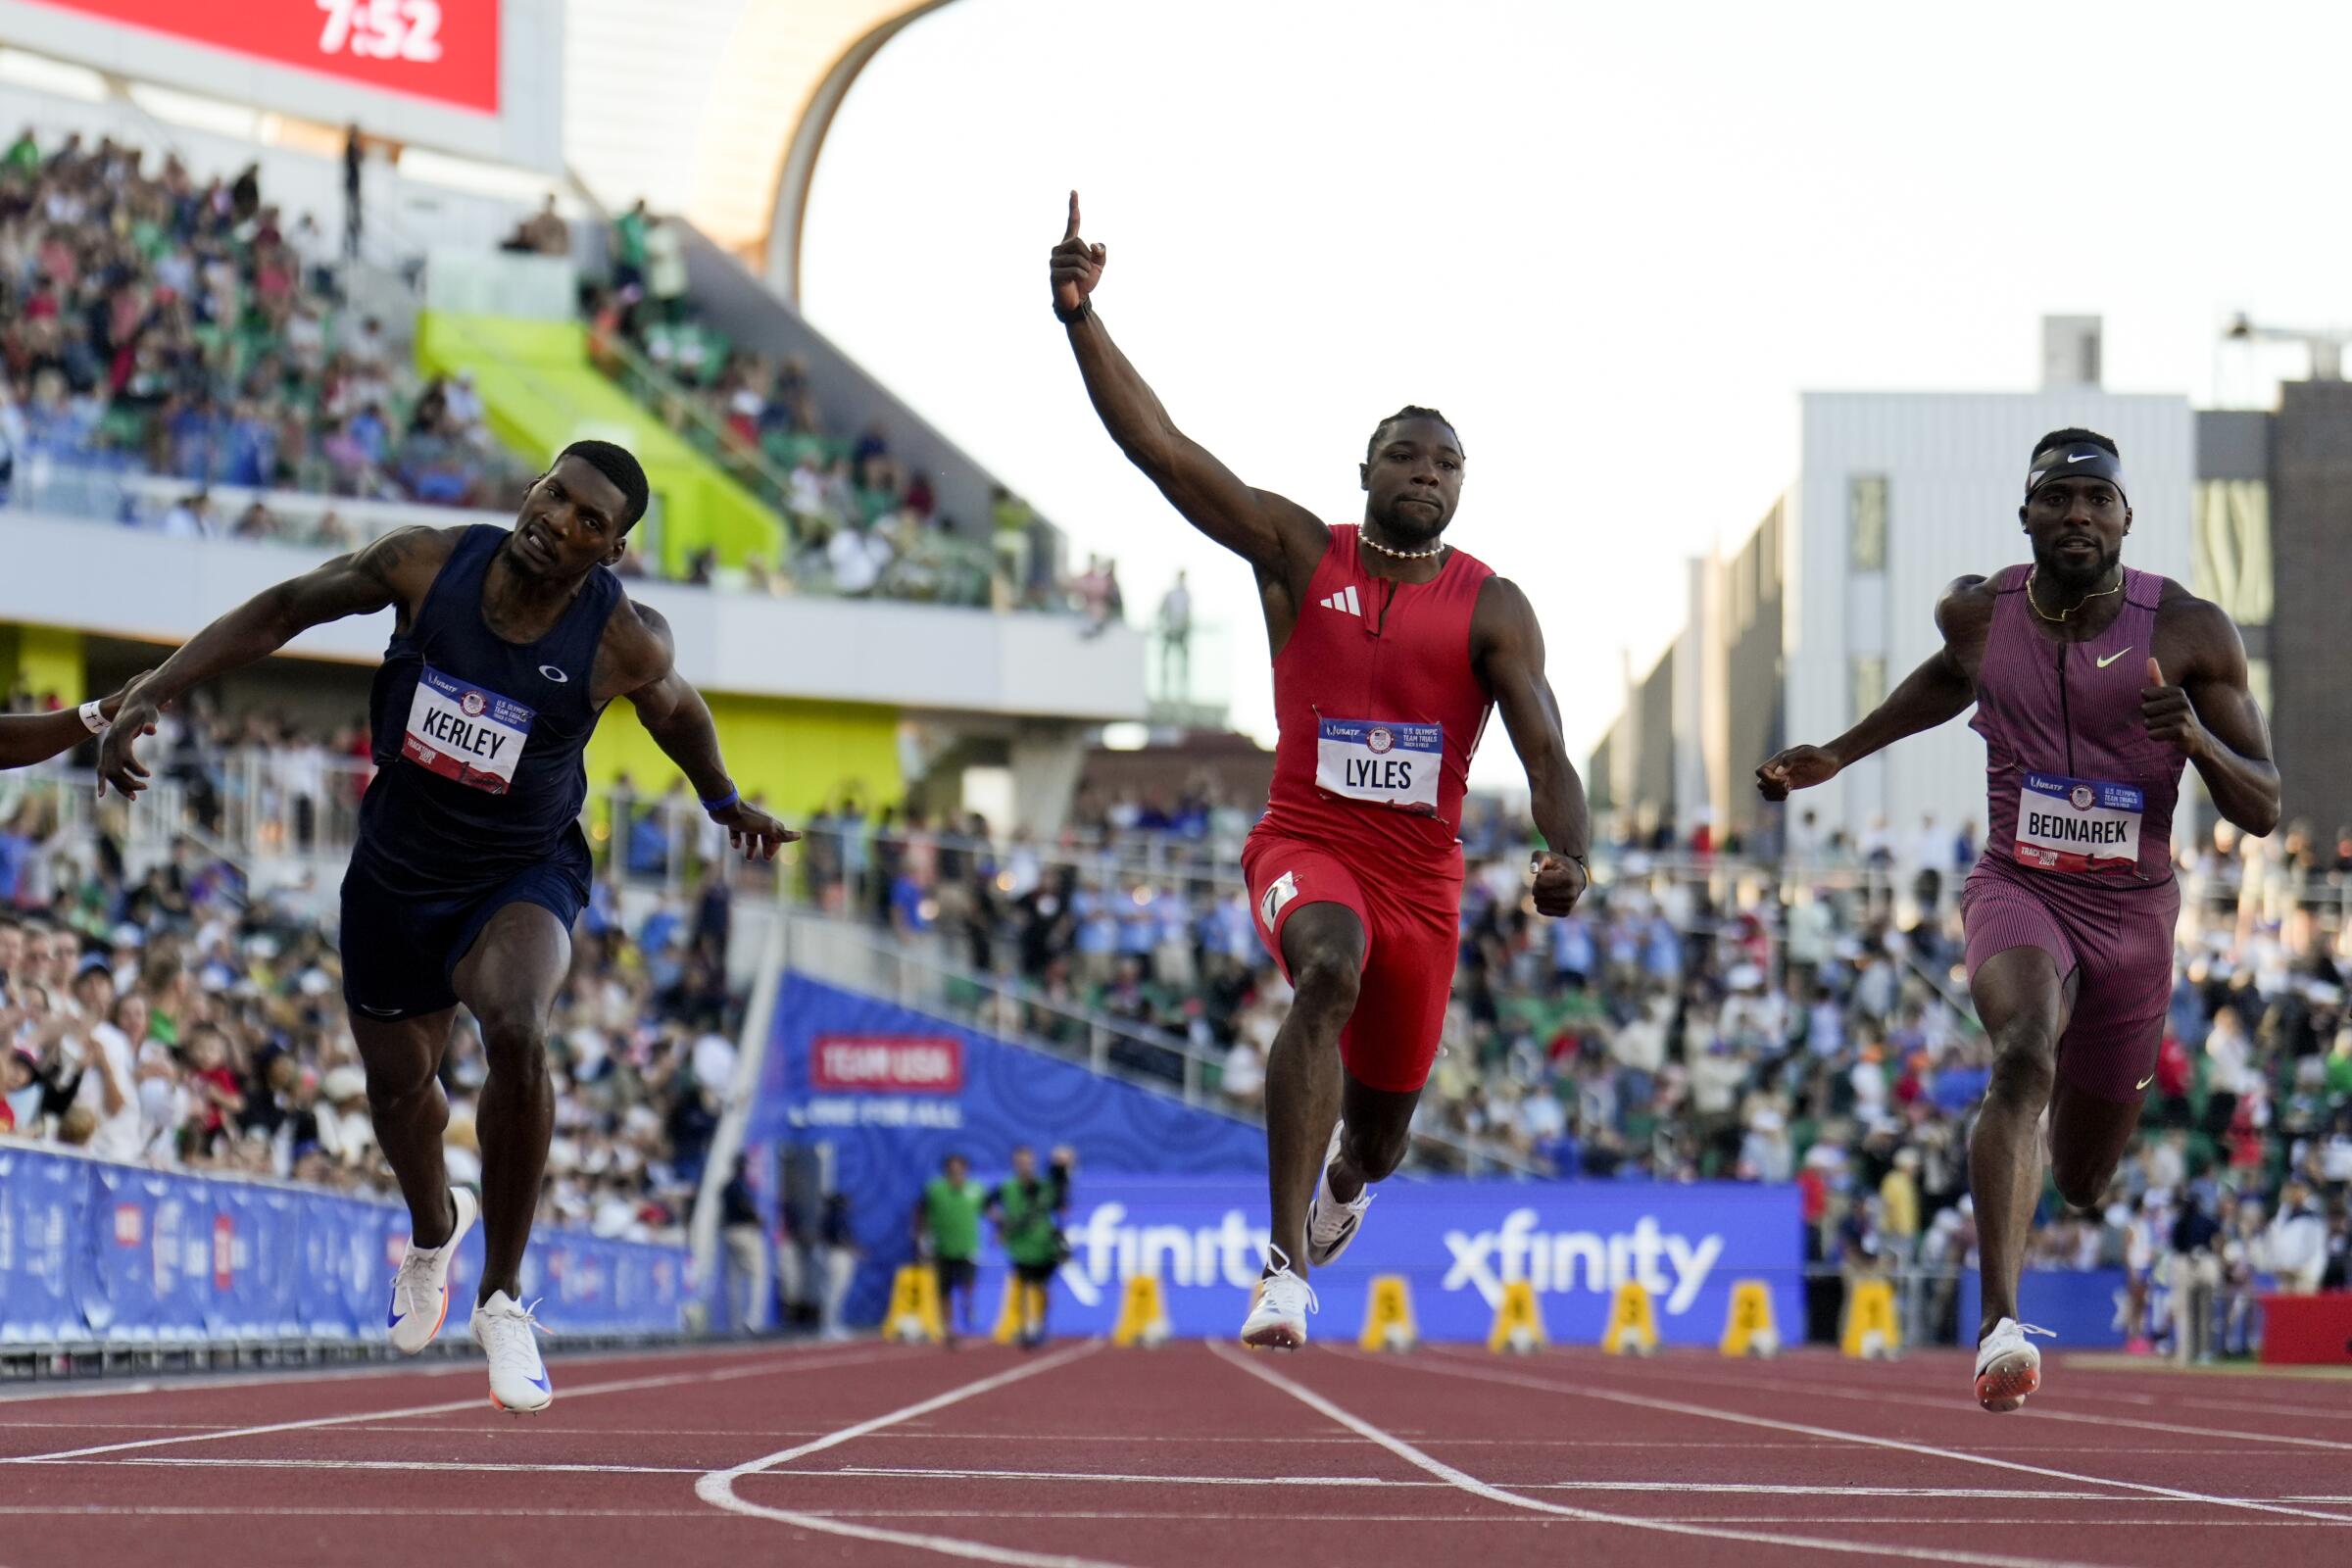 Noah Lyles, center, celebrates after winning the men's 100-meter final at the U.S. Olympic track and field trials on Sunday.